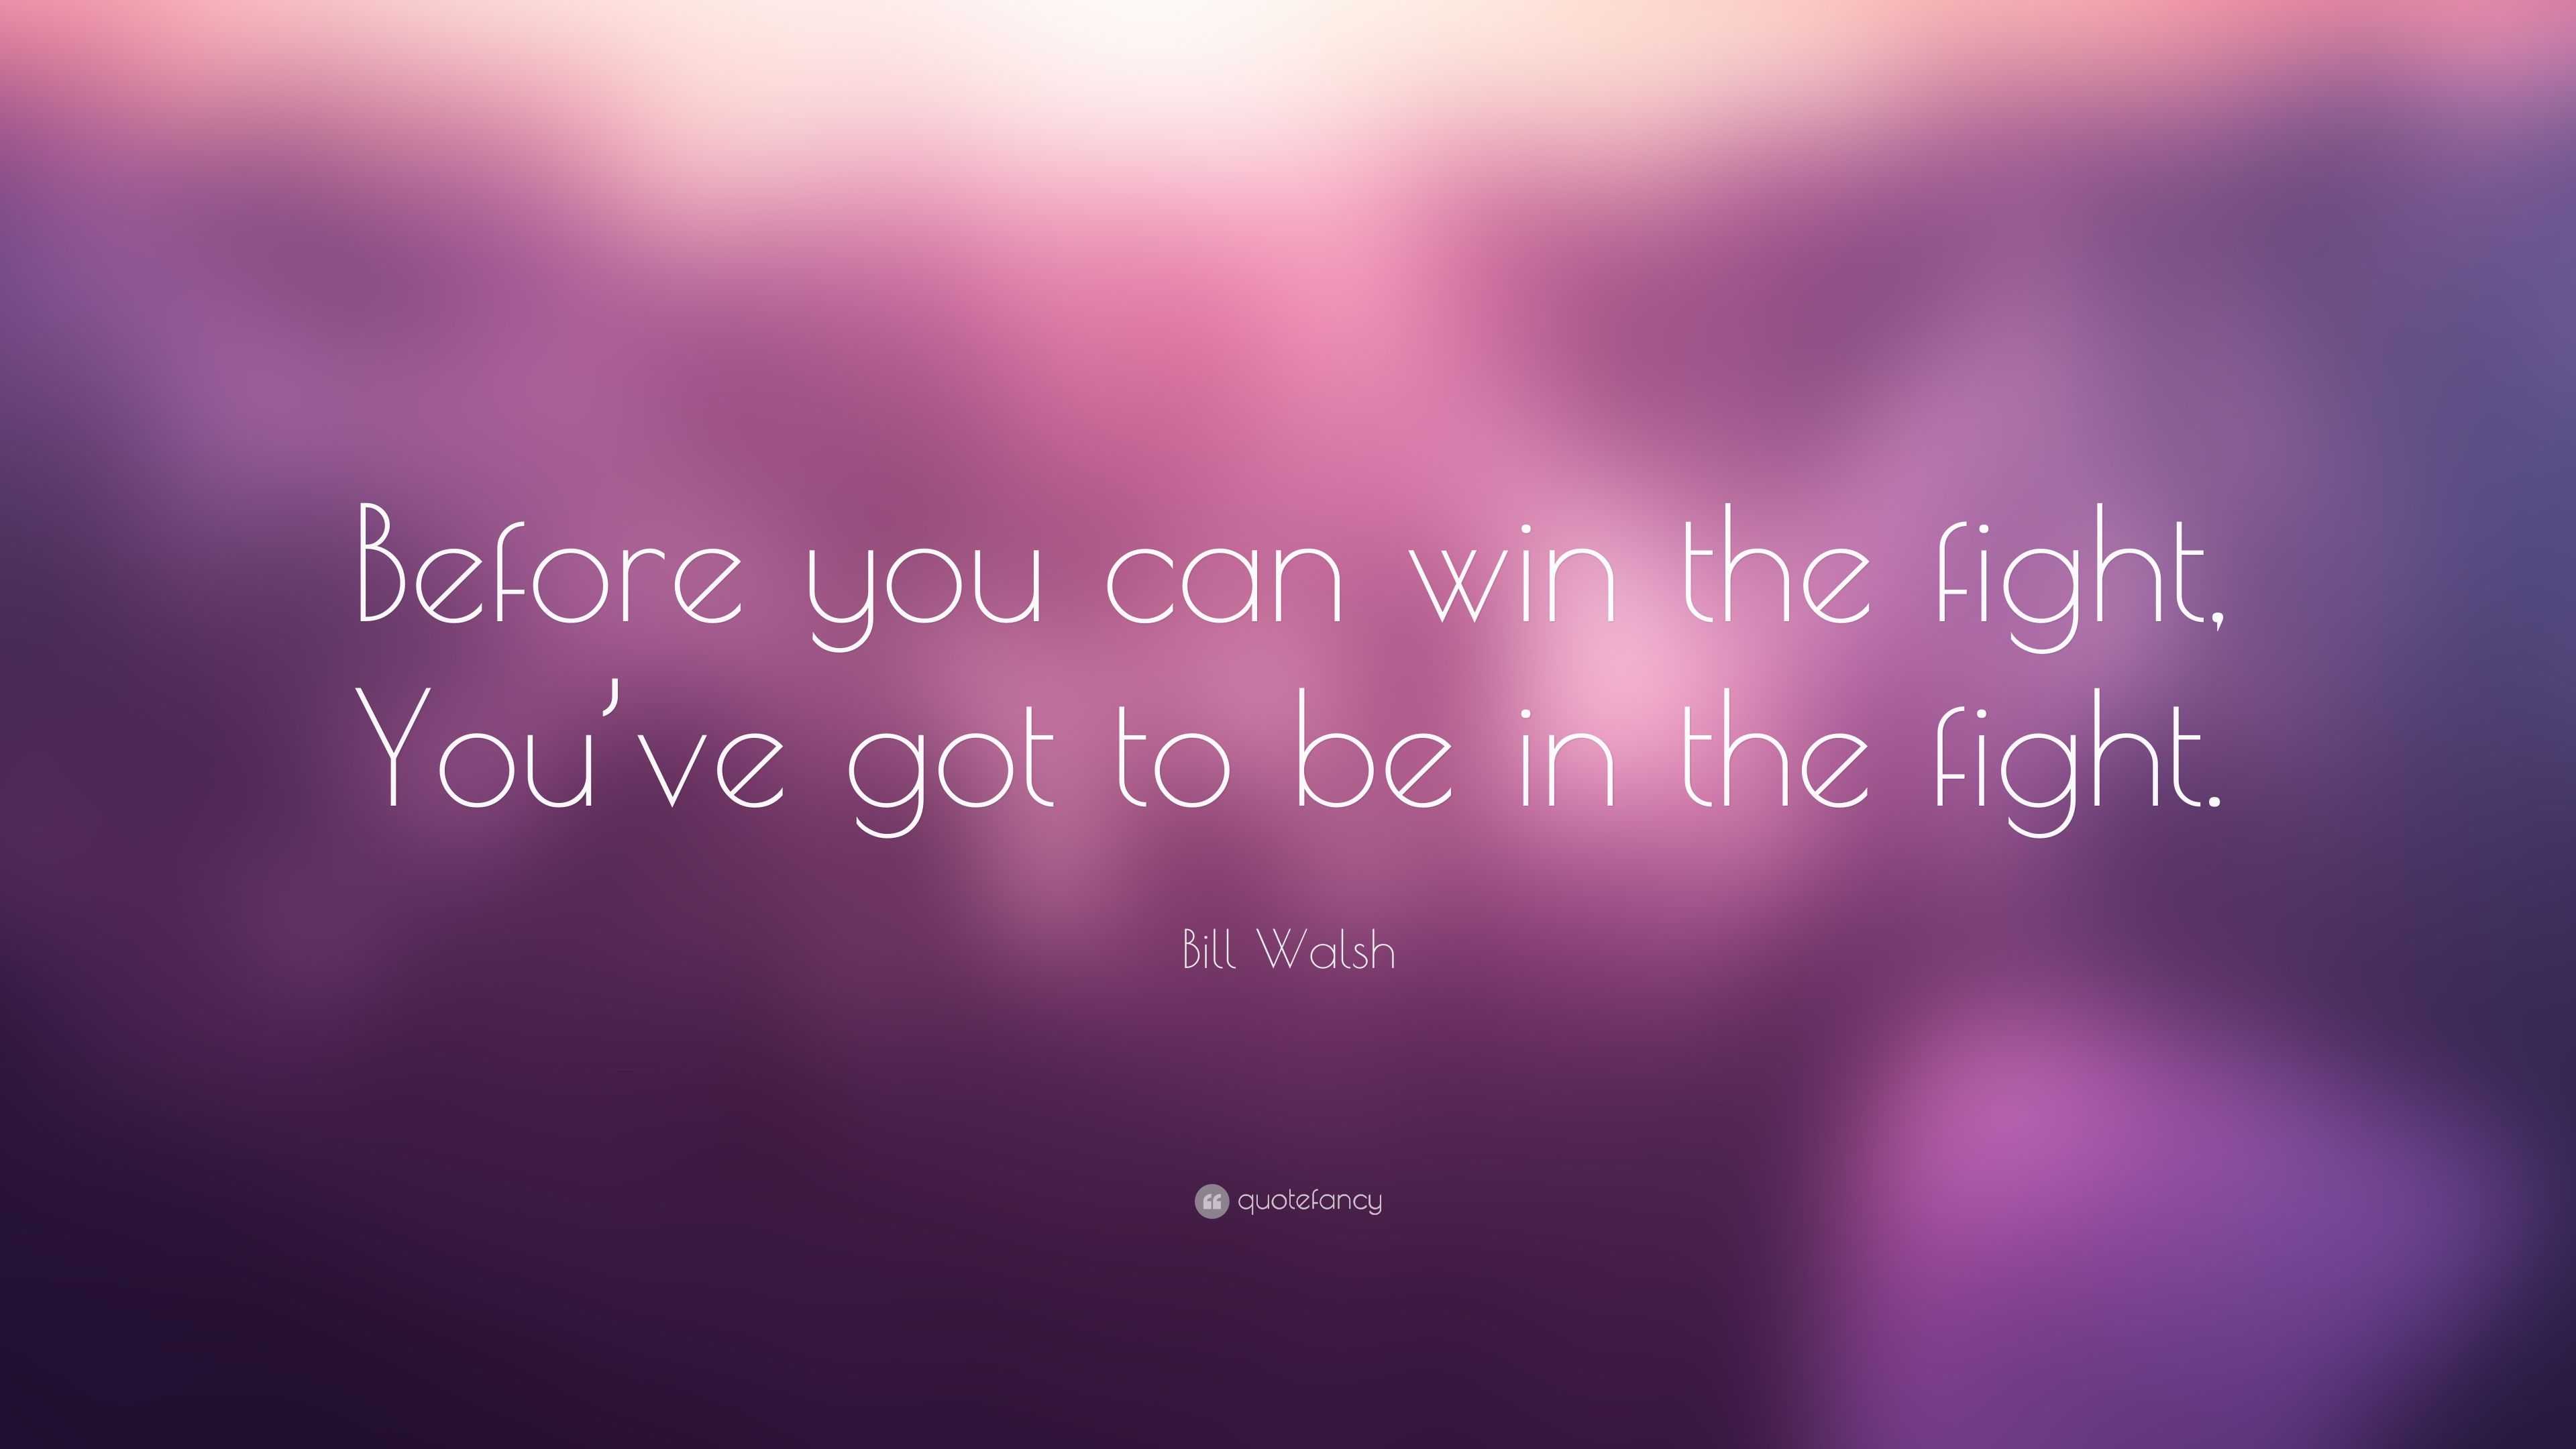 Bill Walsh Quote “before You Can Win The Fight You’ve Got To Be In The Fight ”